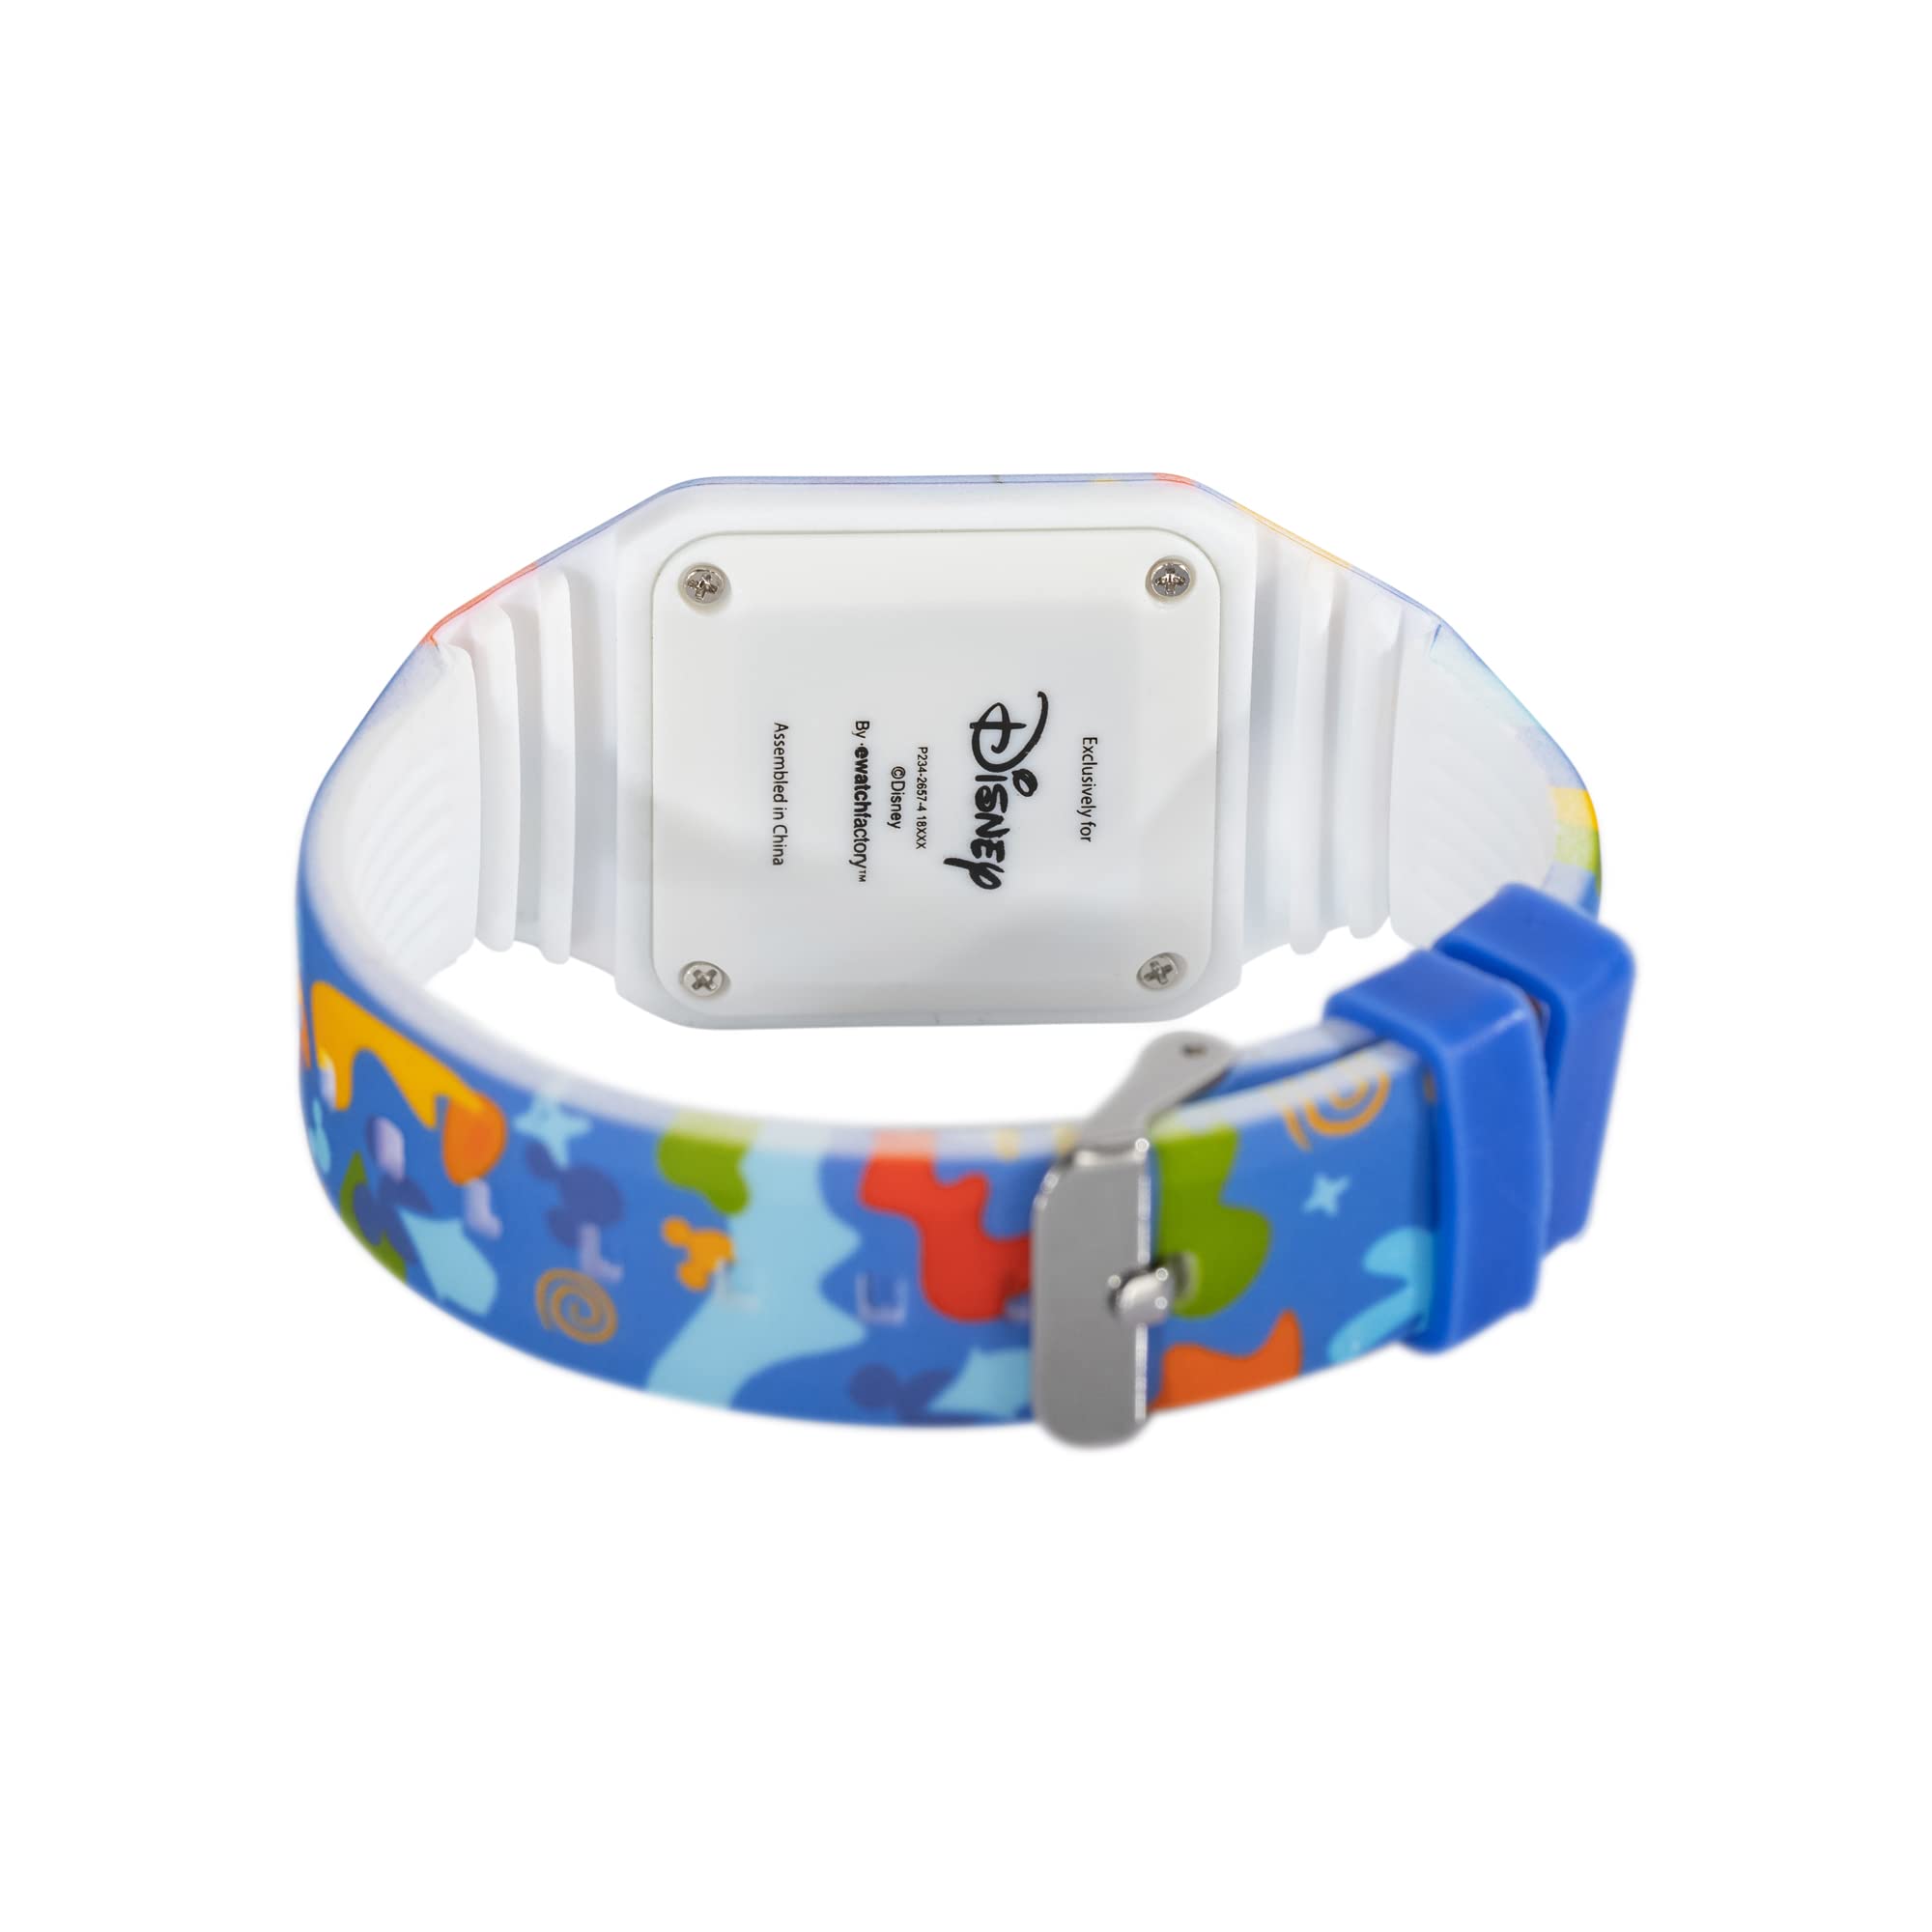 Kids LED Digtal Display Watch with Allover Graphics Strap